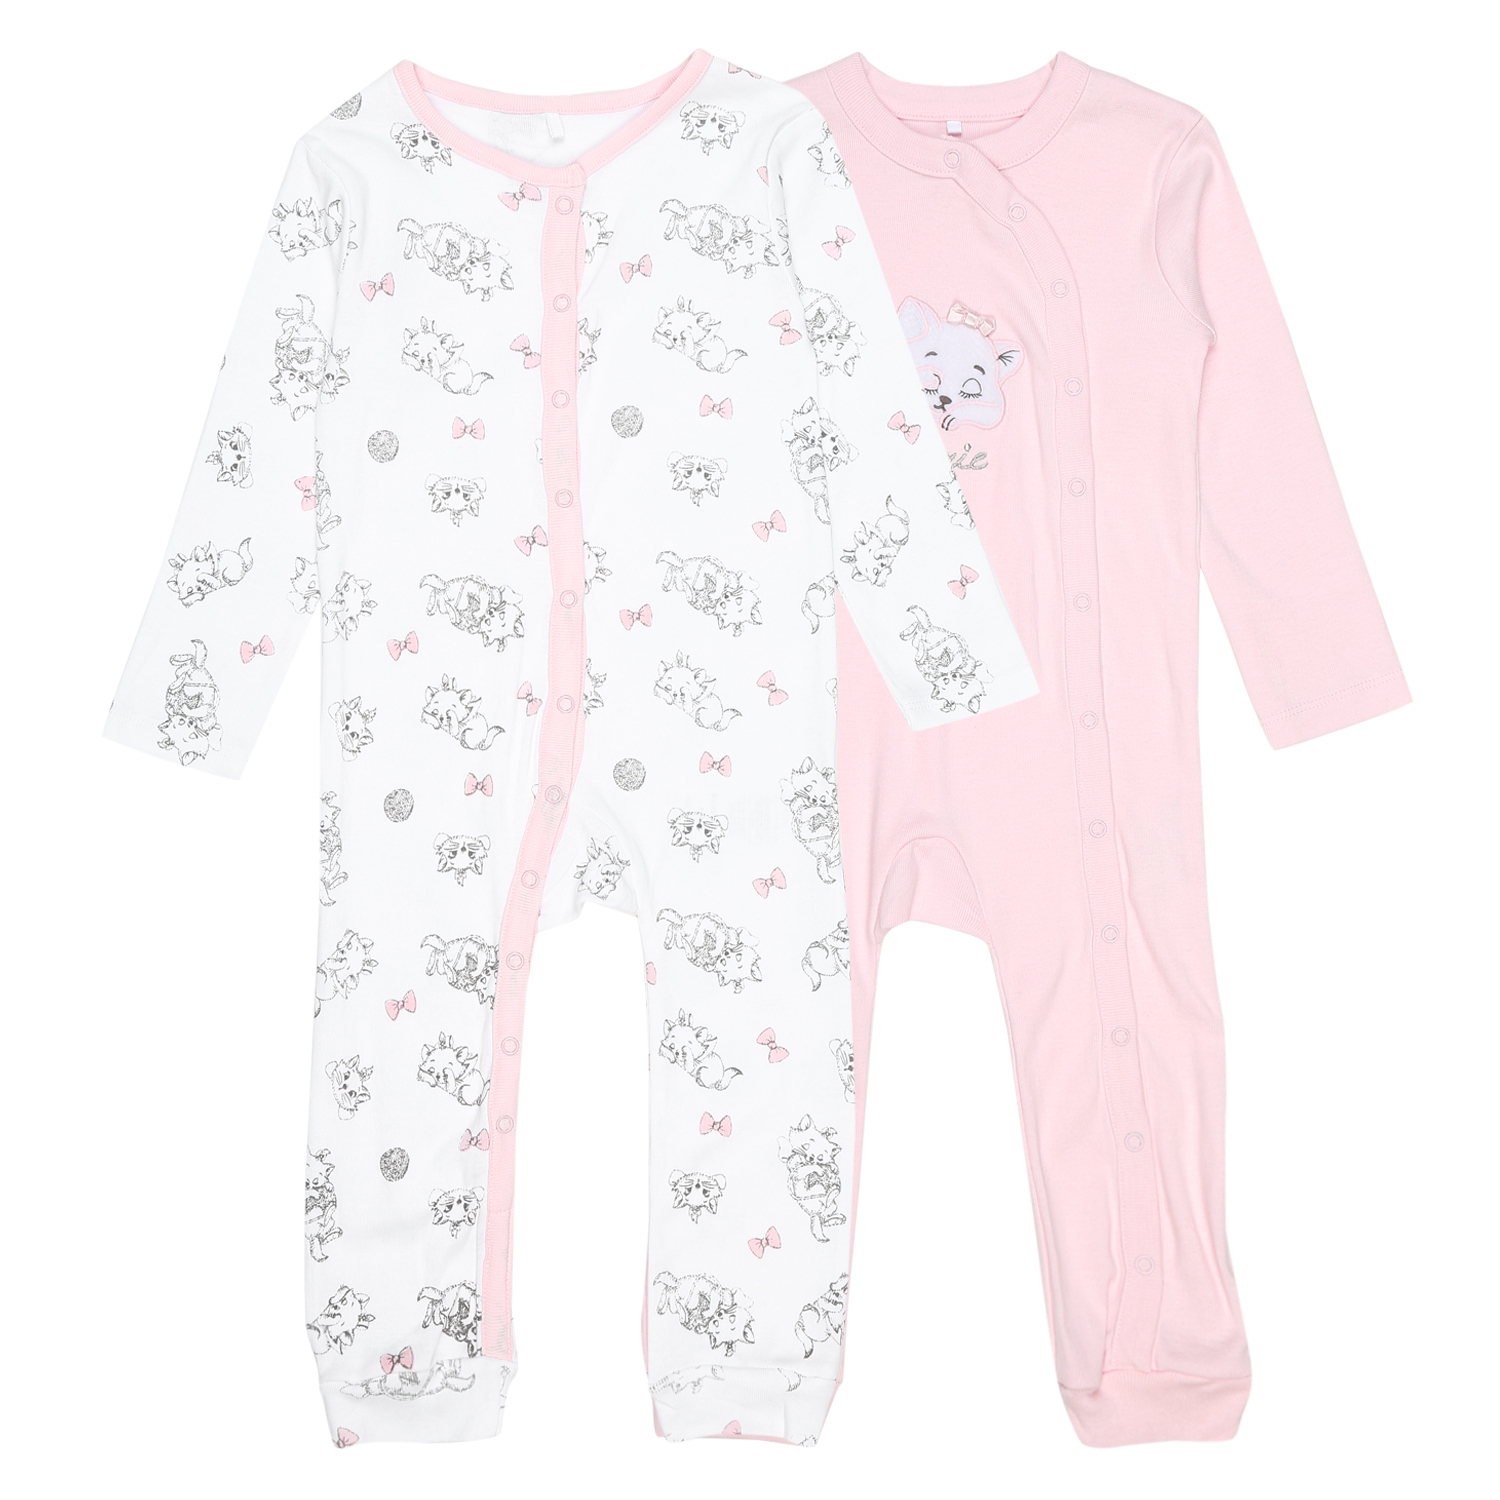 Mothercare | Unisex Packed Sleepsuit - Multicolor - Pack of 2